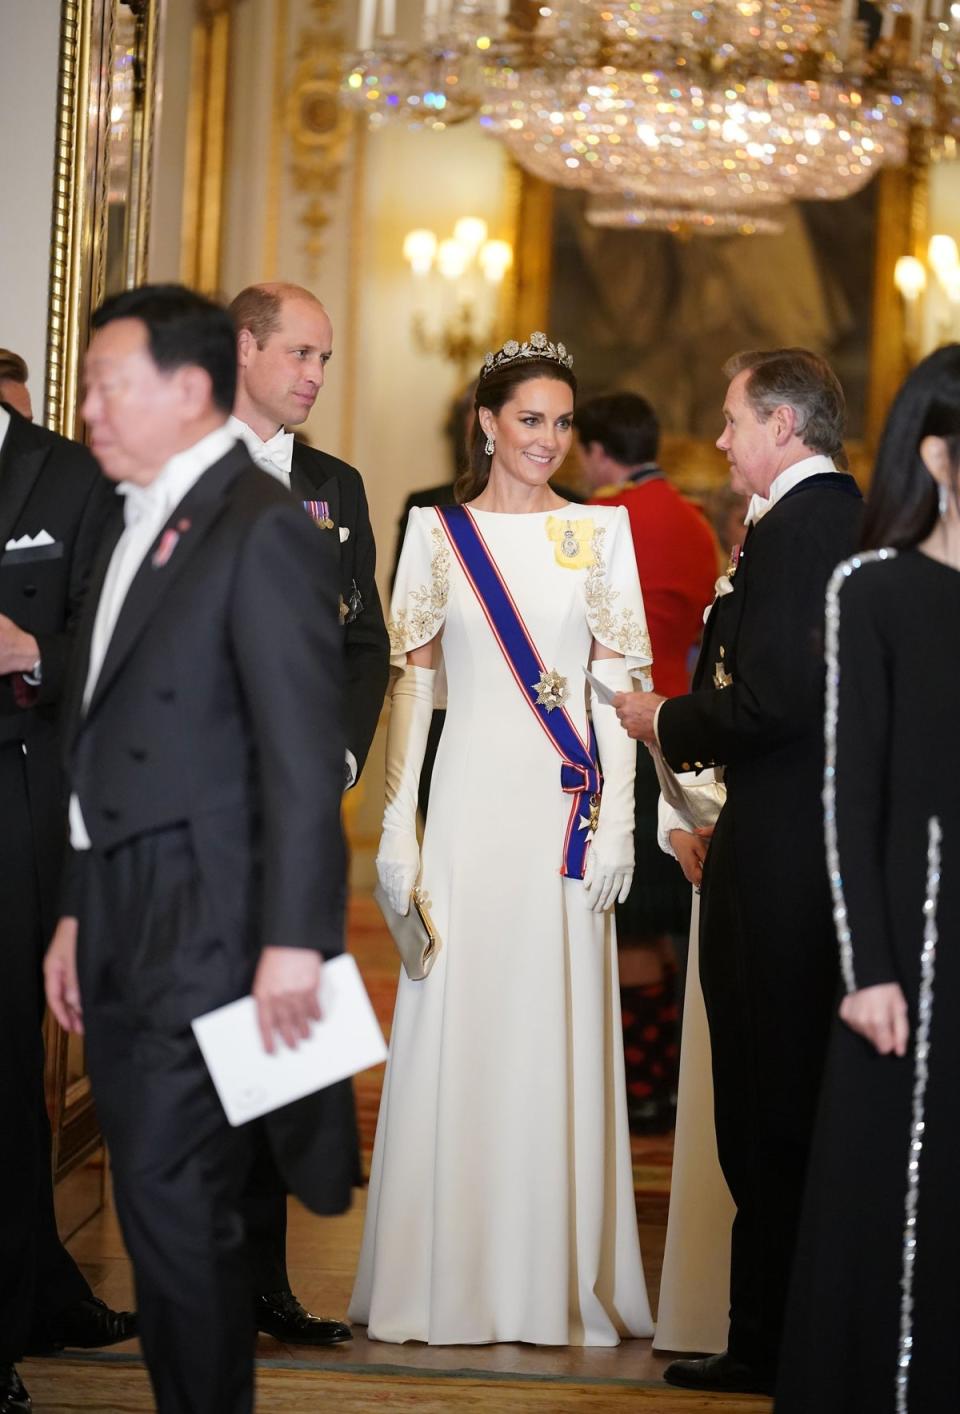 Prince William, Prince of Wales and Catherine, Princess of Wales attend the State Banquet at Buckingham Palace (Getty Images)